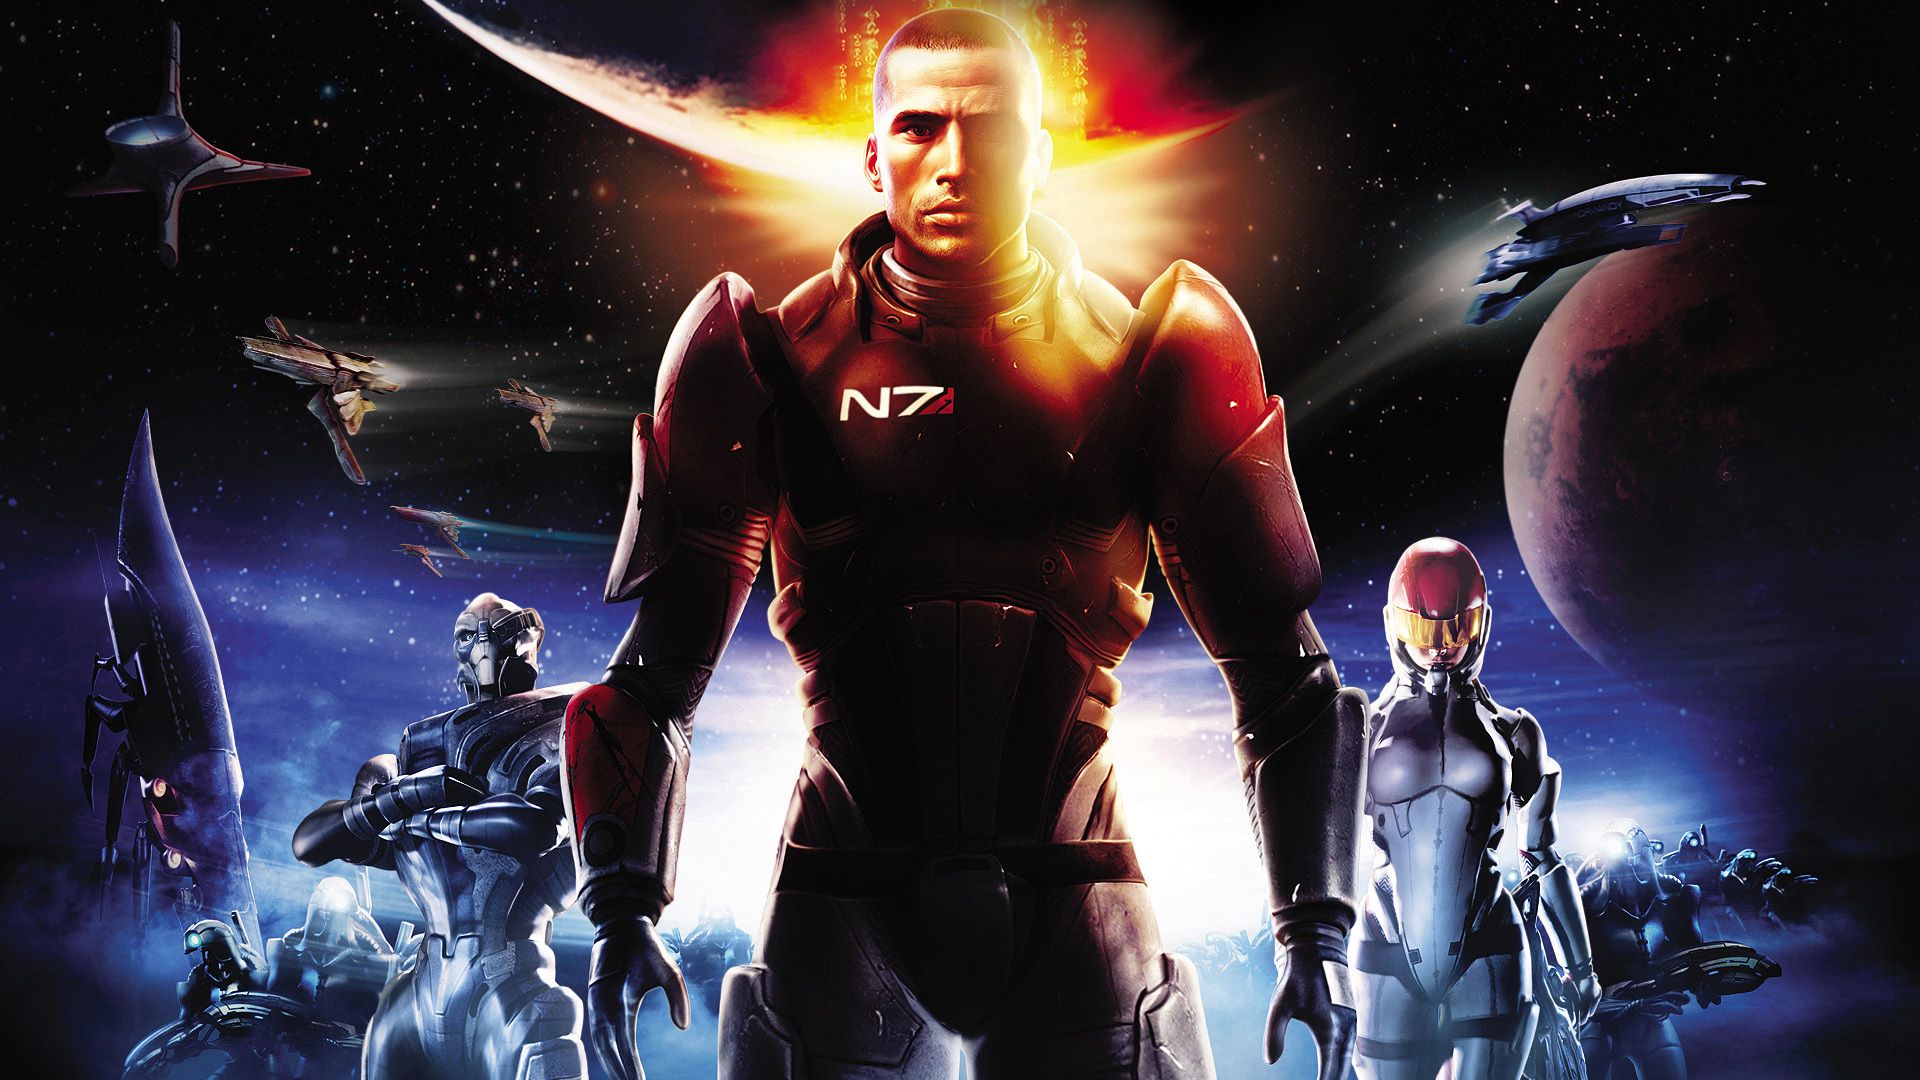 Mass Effect Legendary Edition Changes Might Save the Original Game. Den of Geek